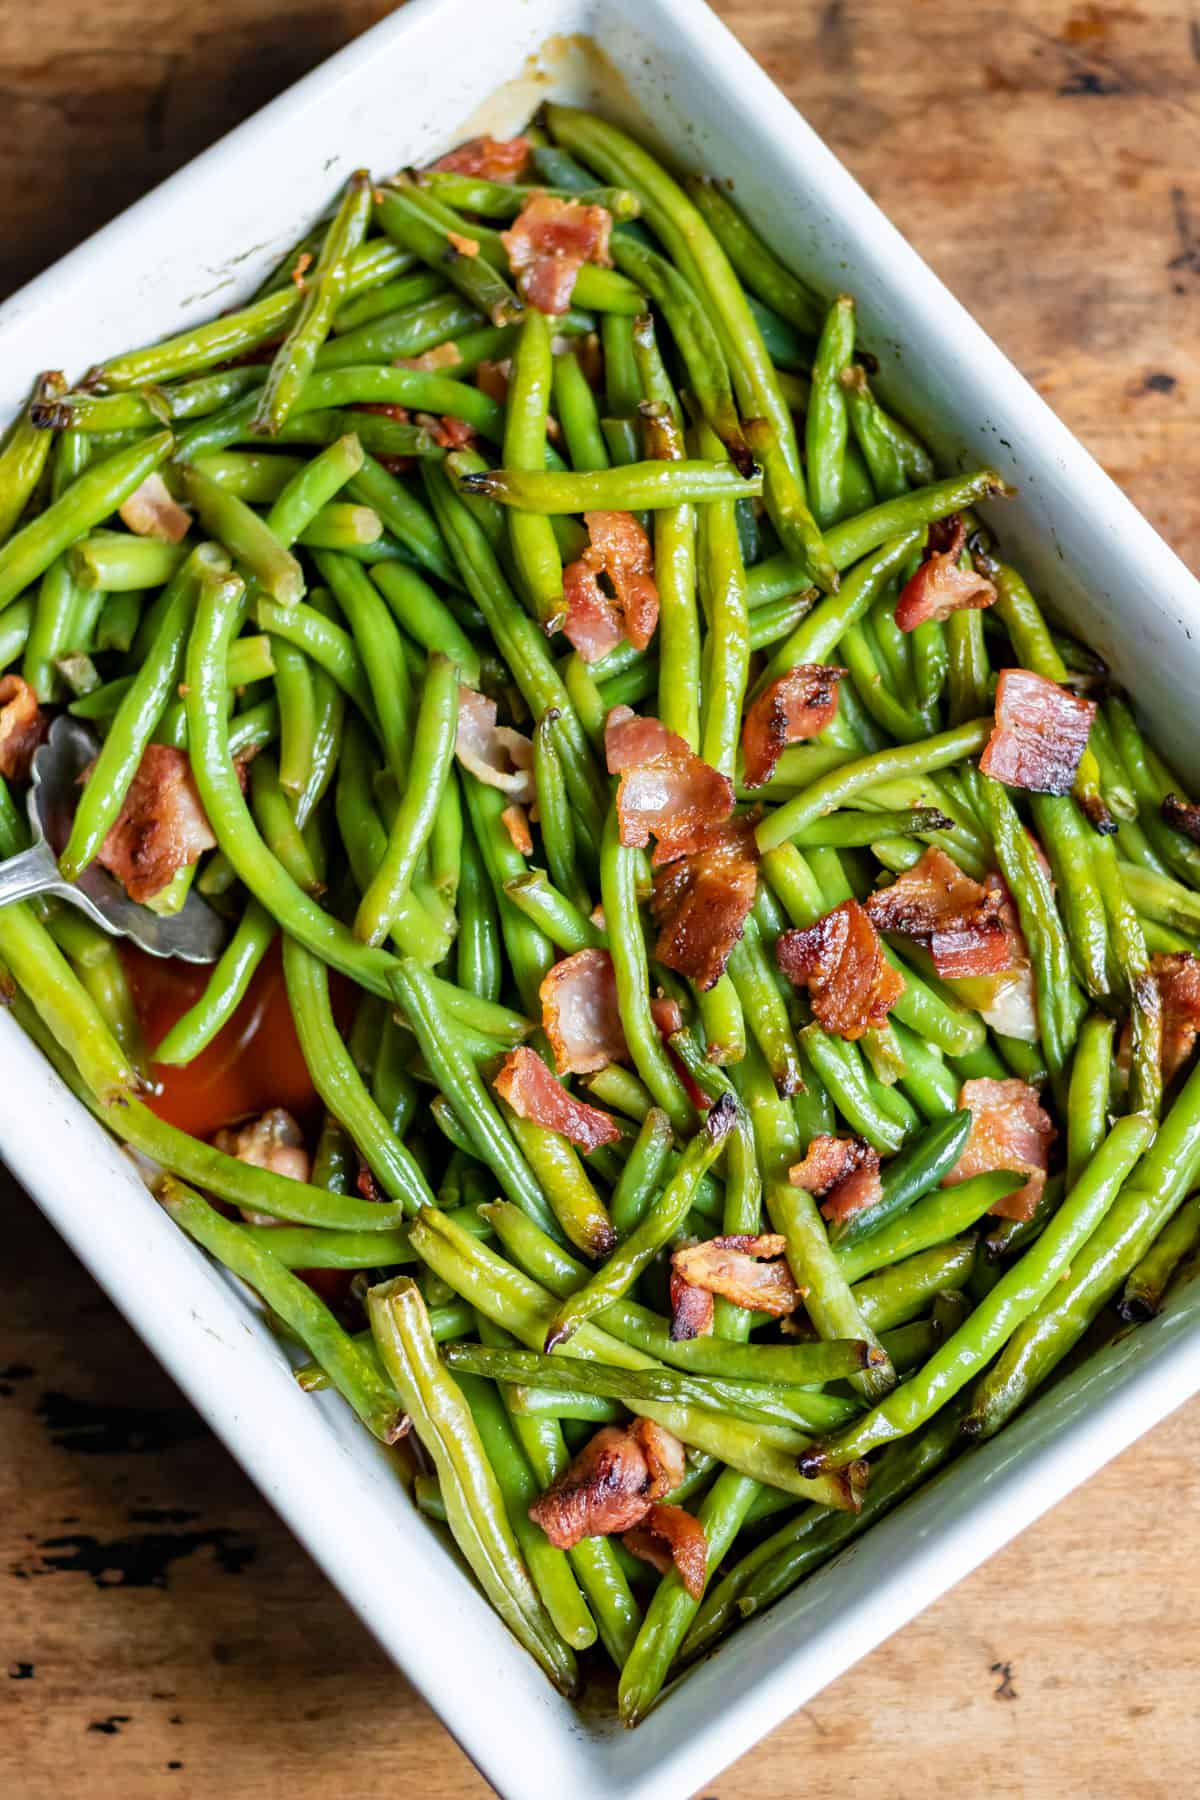 Serving dish of green beans with bacon.